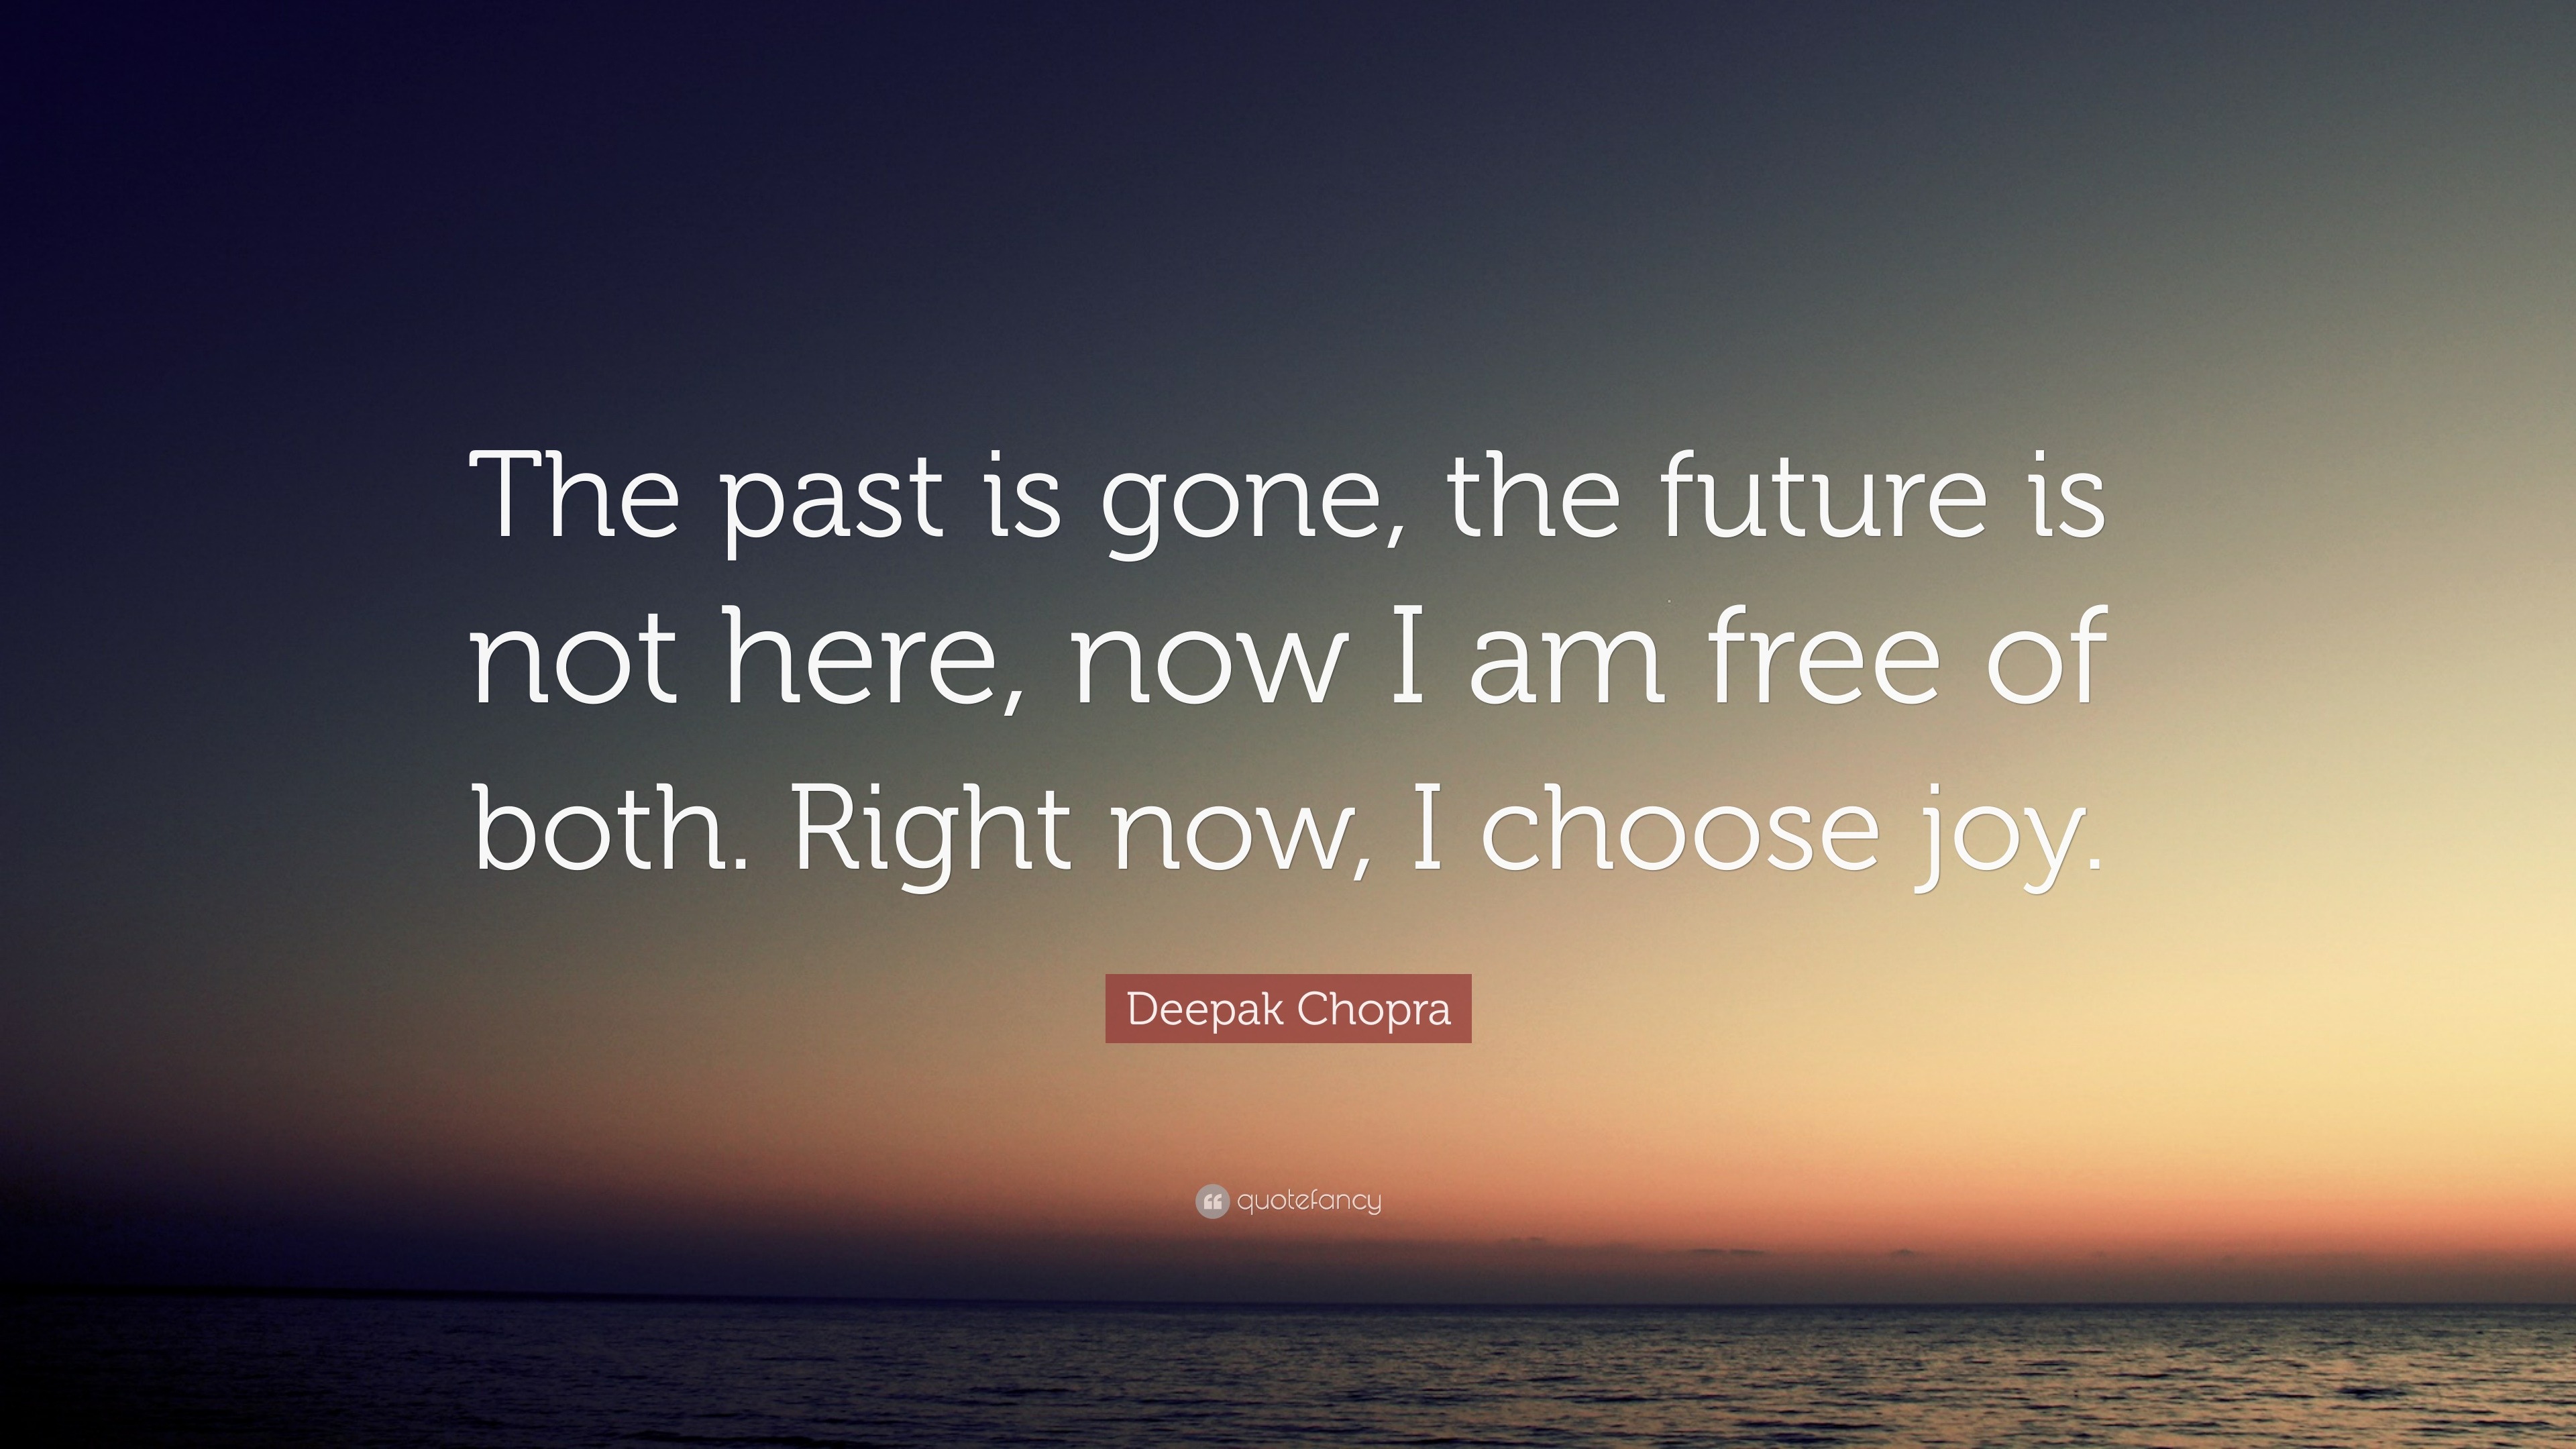 Deepak Chopra Quote: “The past is gone, the future is not here, now I